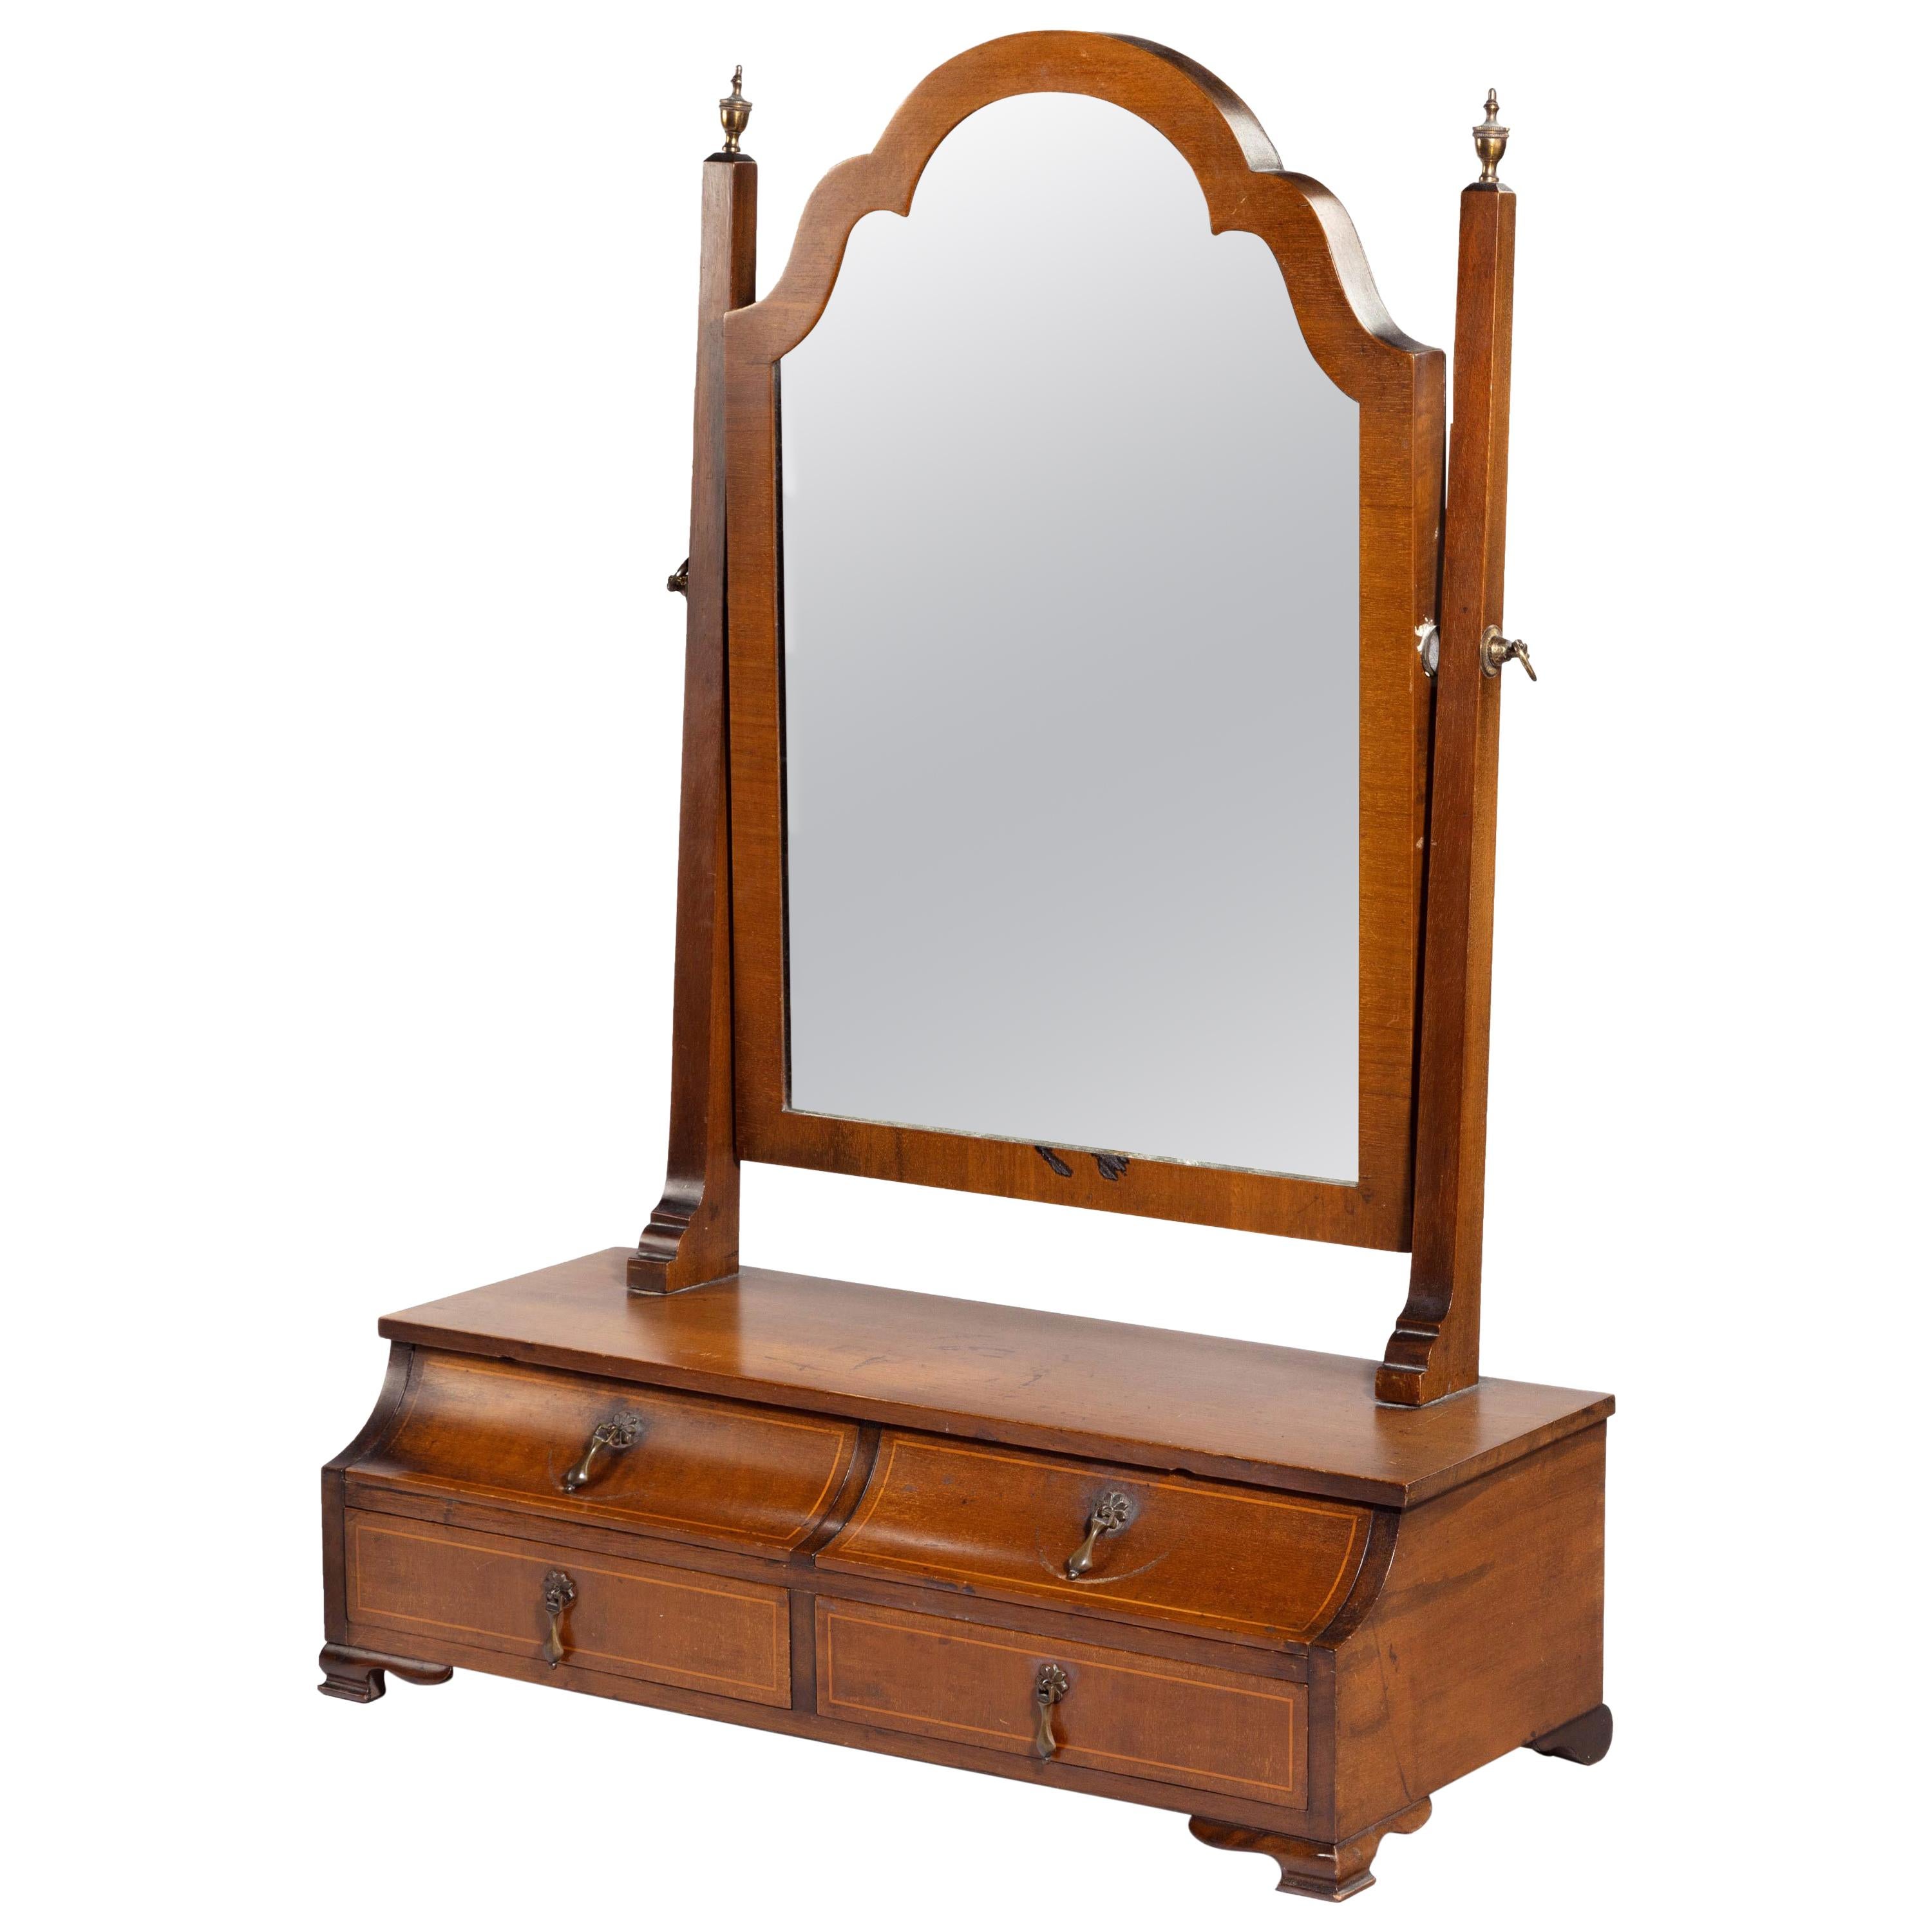 Most Unusual Early 20th Century Mahogany Framed Mirror of Queen Anne Design